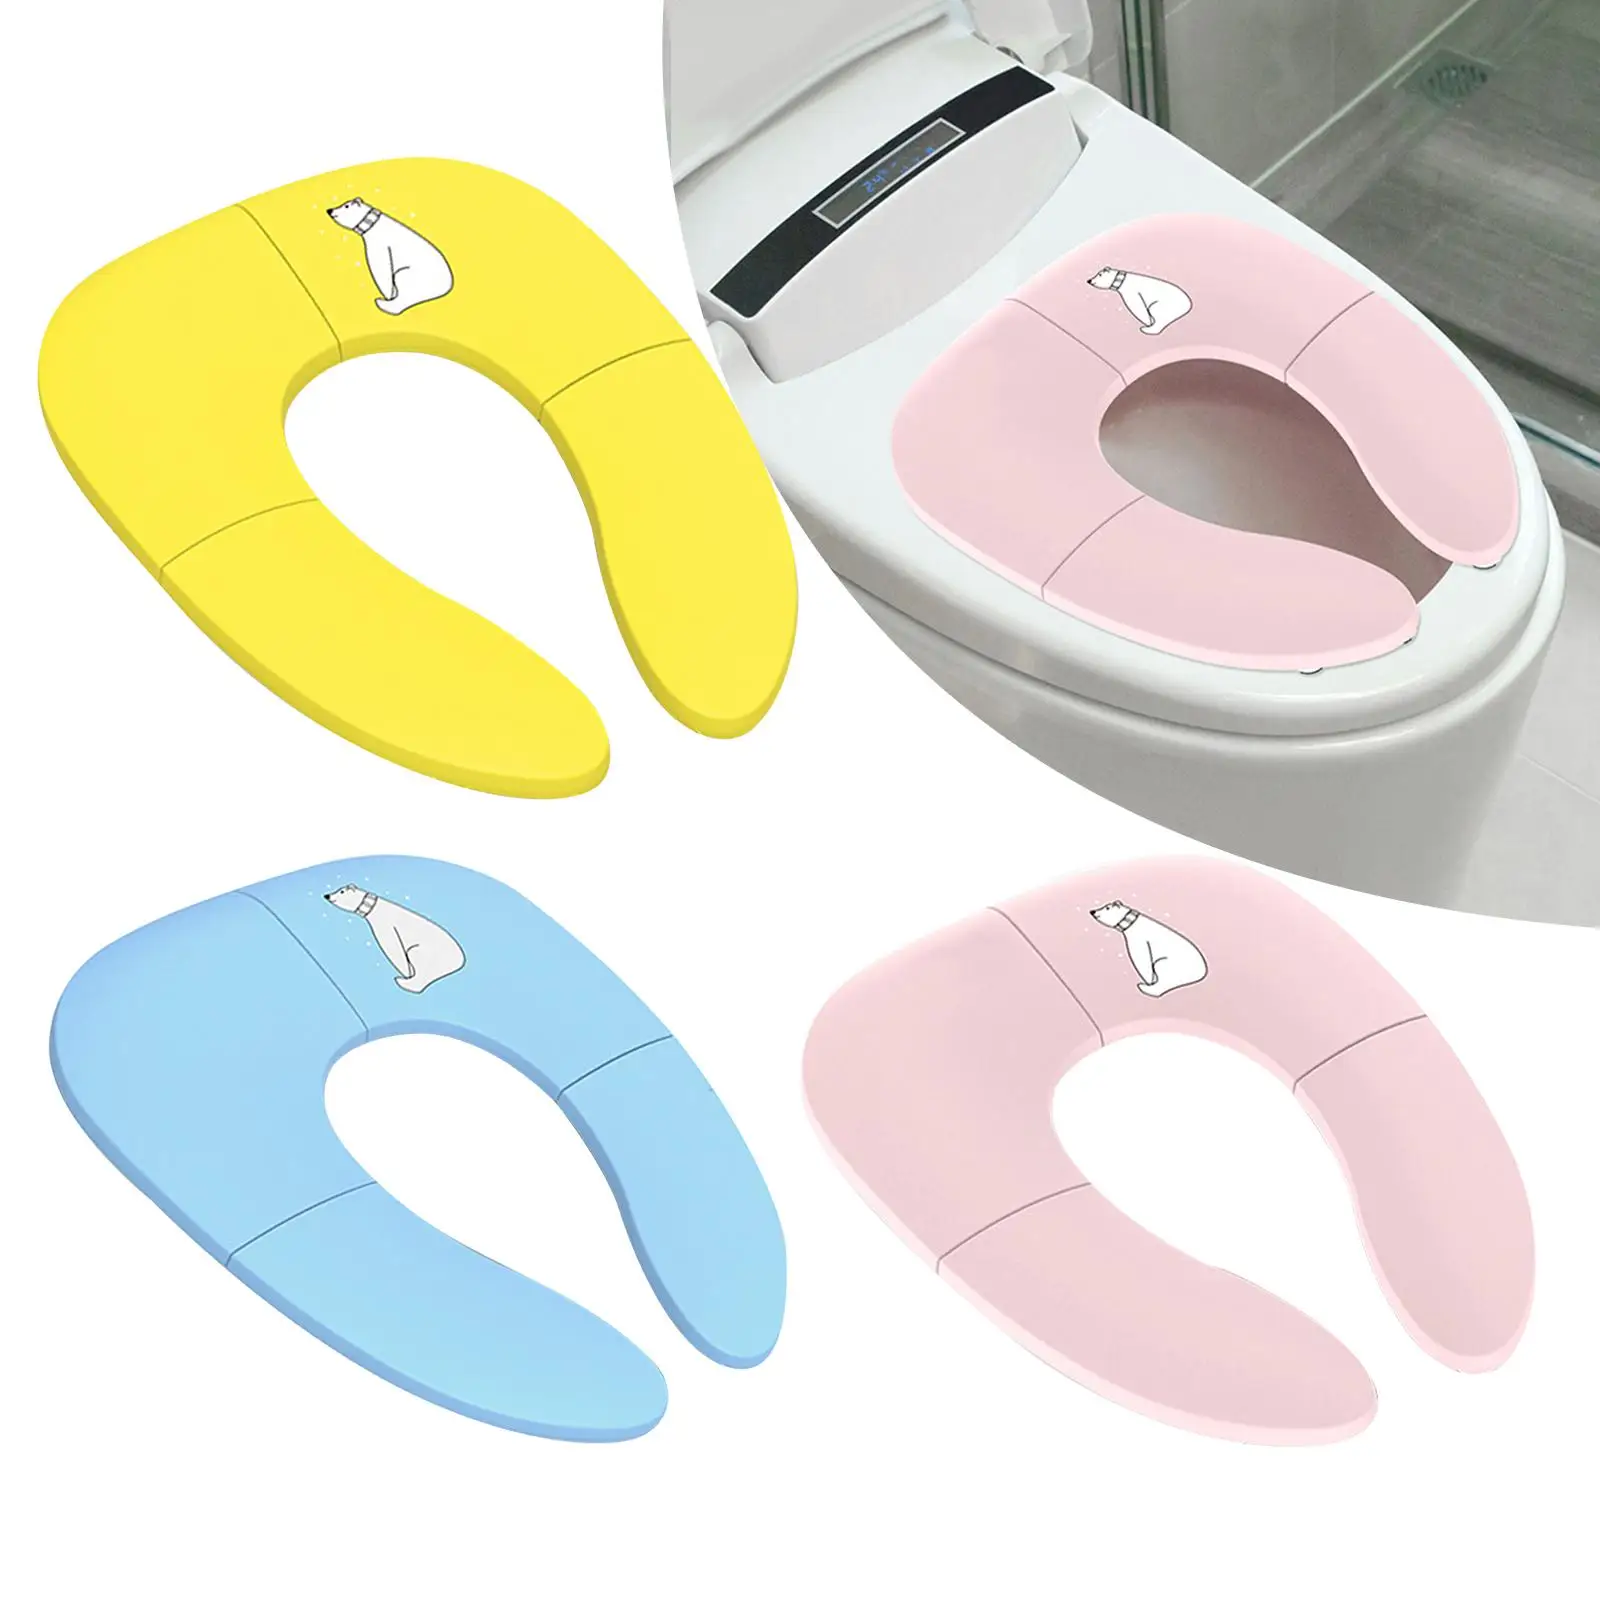 Toilet Seat pad Non Slip Portable for Round and Oval Toilets Girls Toddler